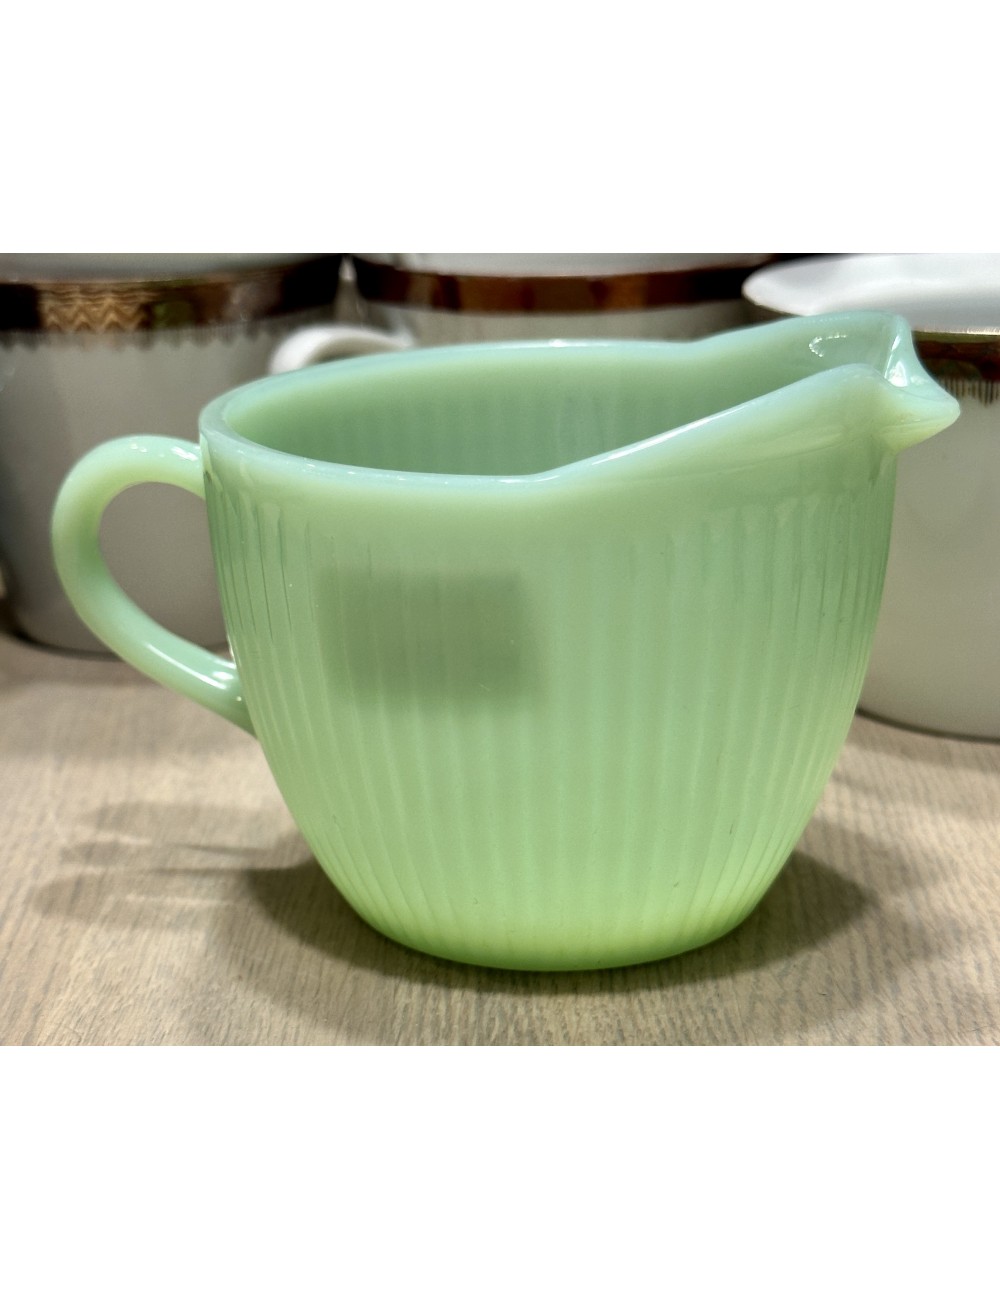 Milk jug - Fire King - Oven Glass - finished in jadeite green